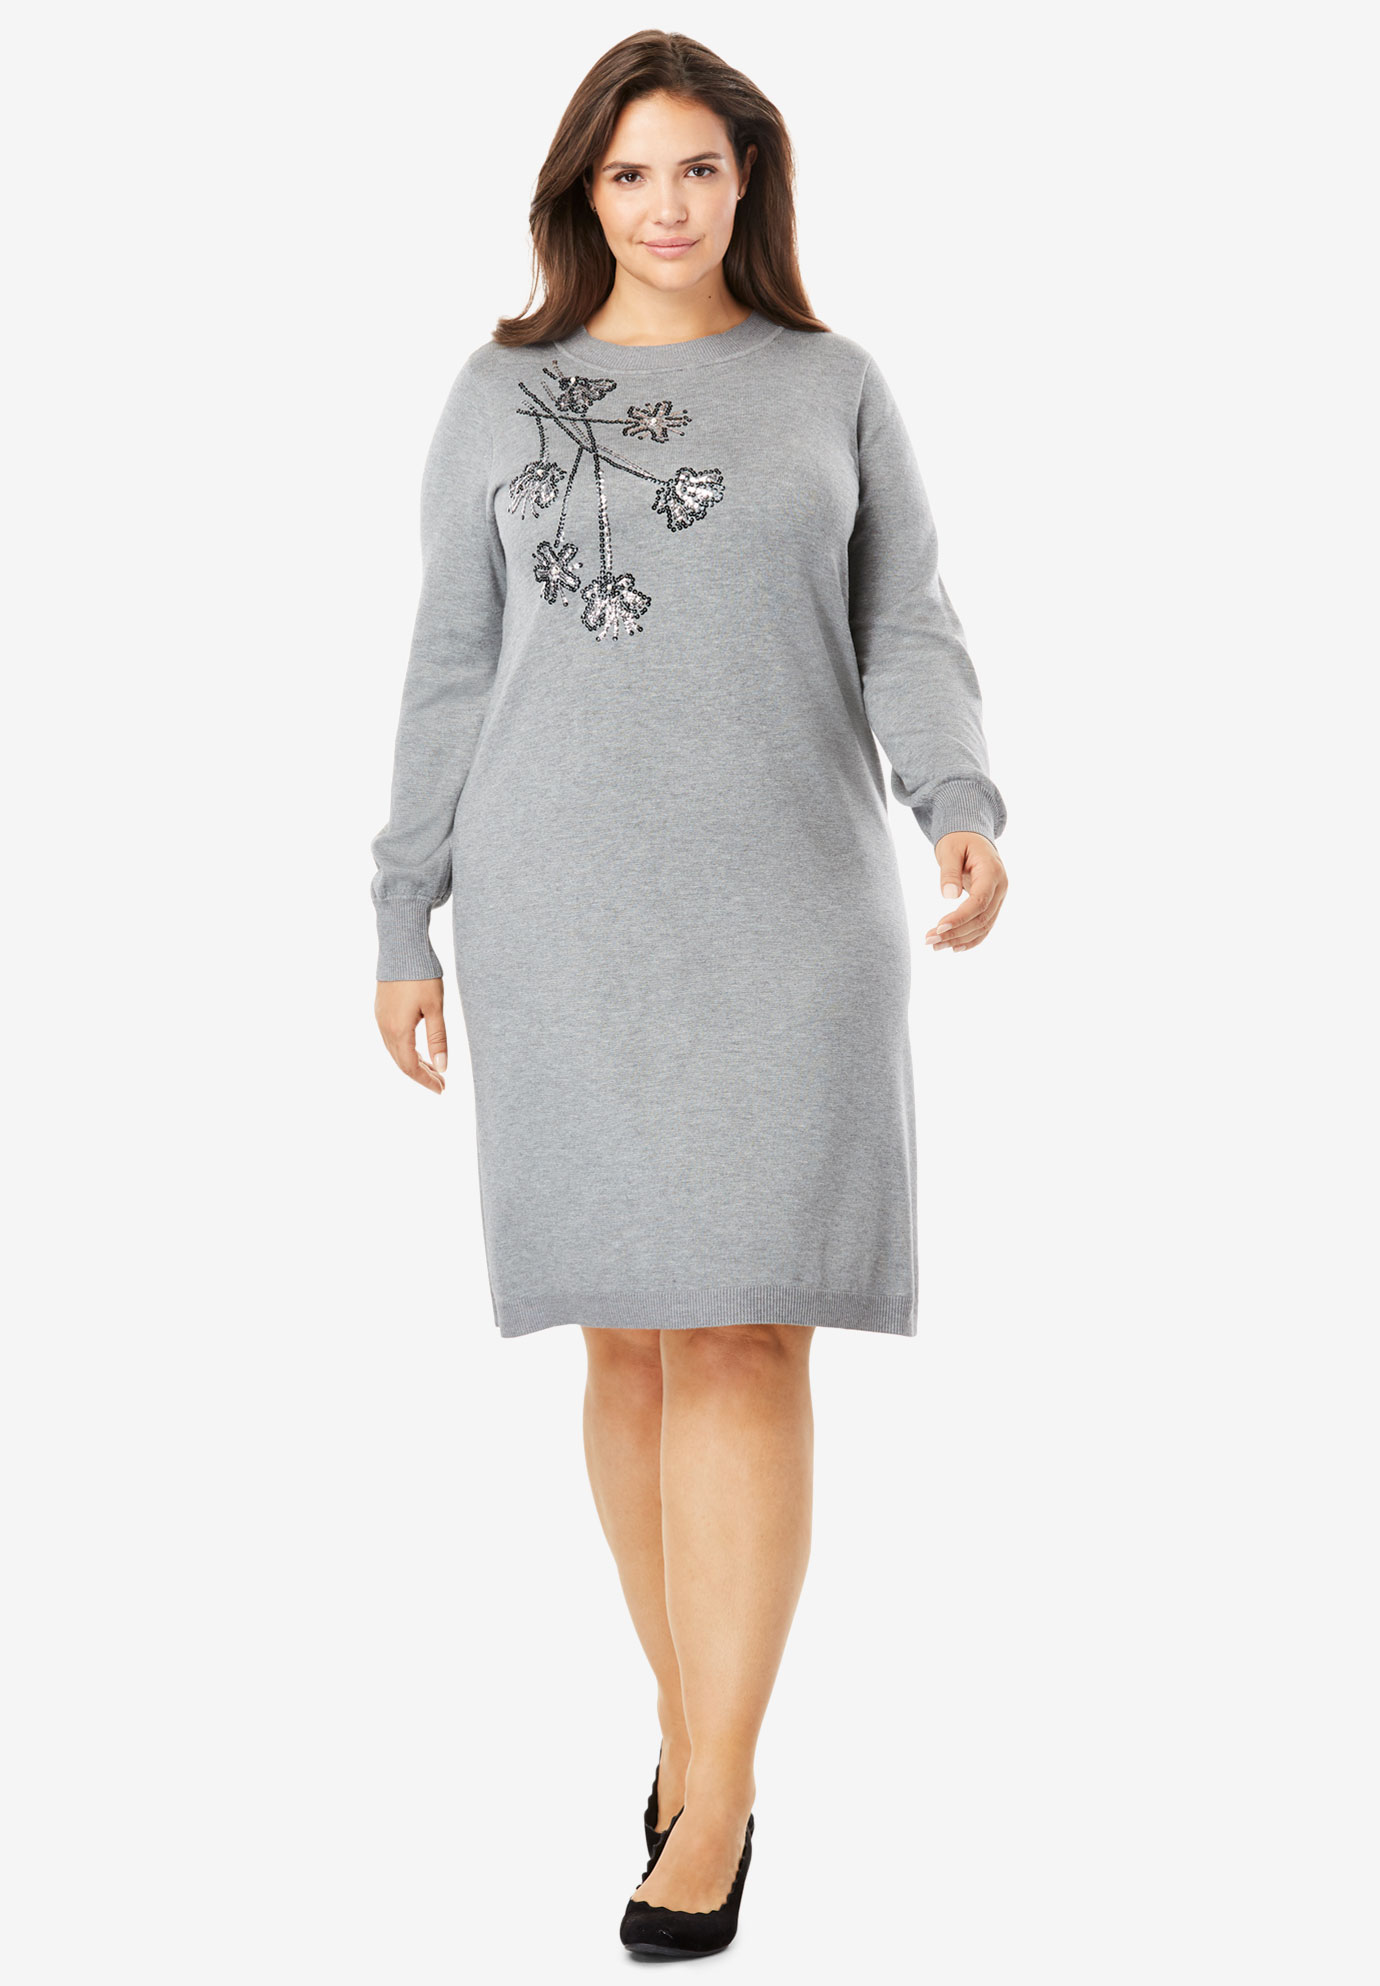 Embellished Sweater Dress | Woman Within